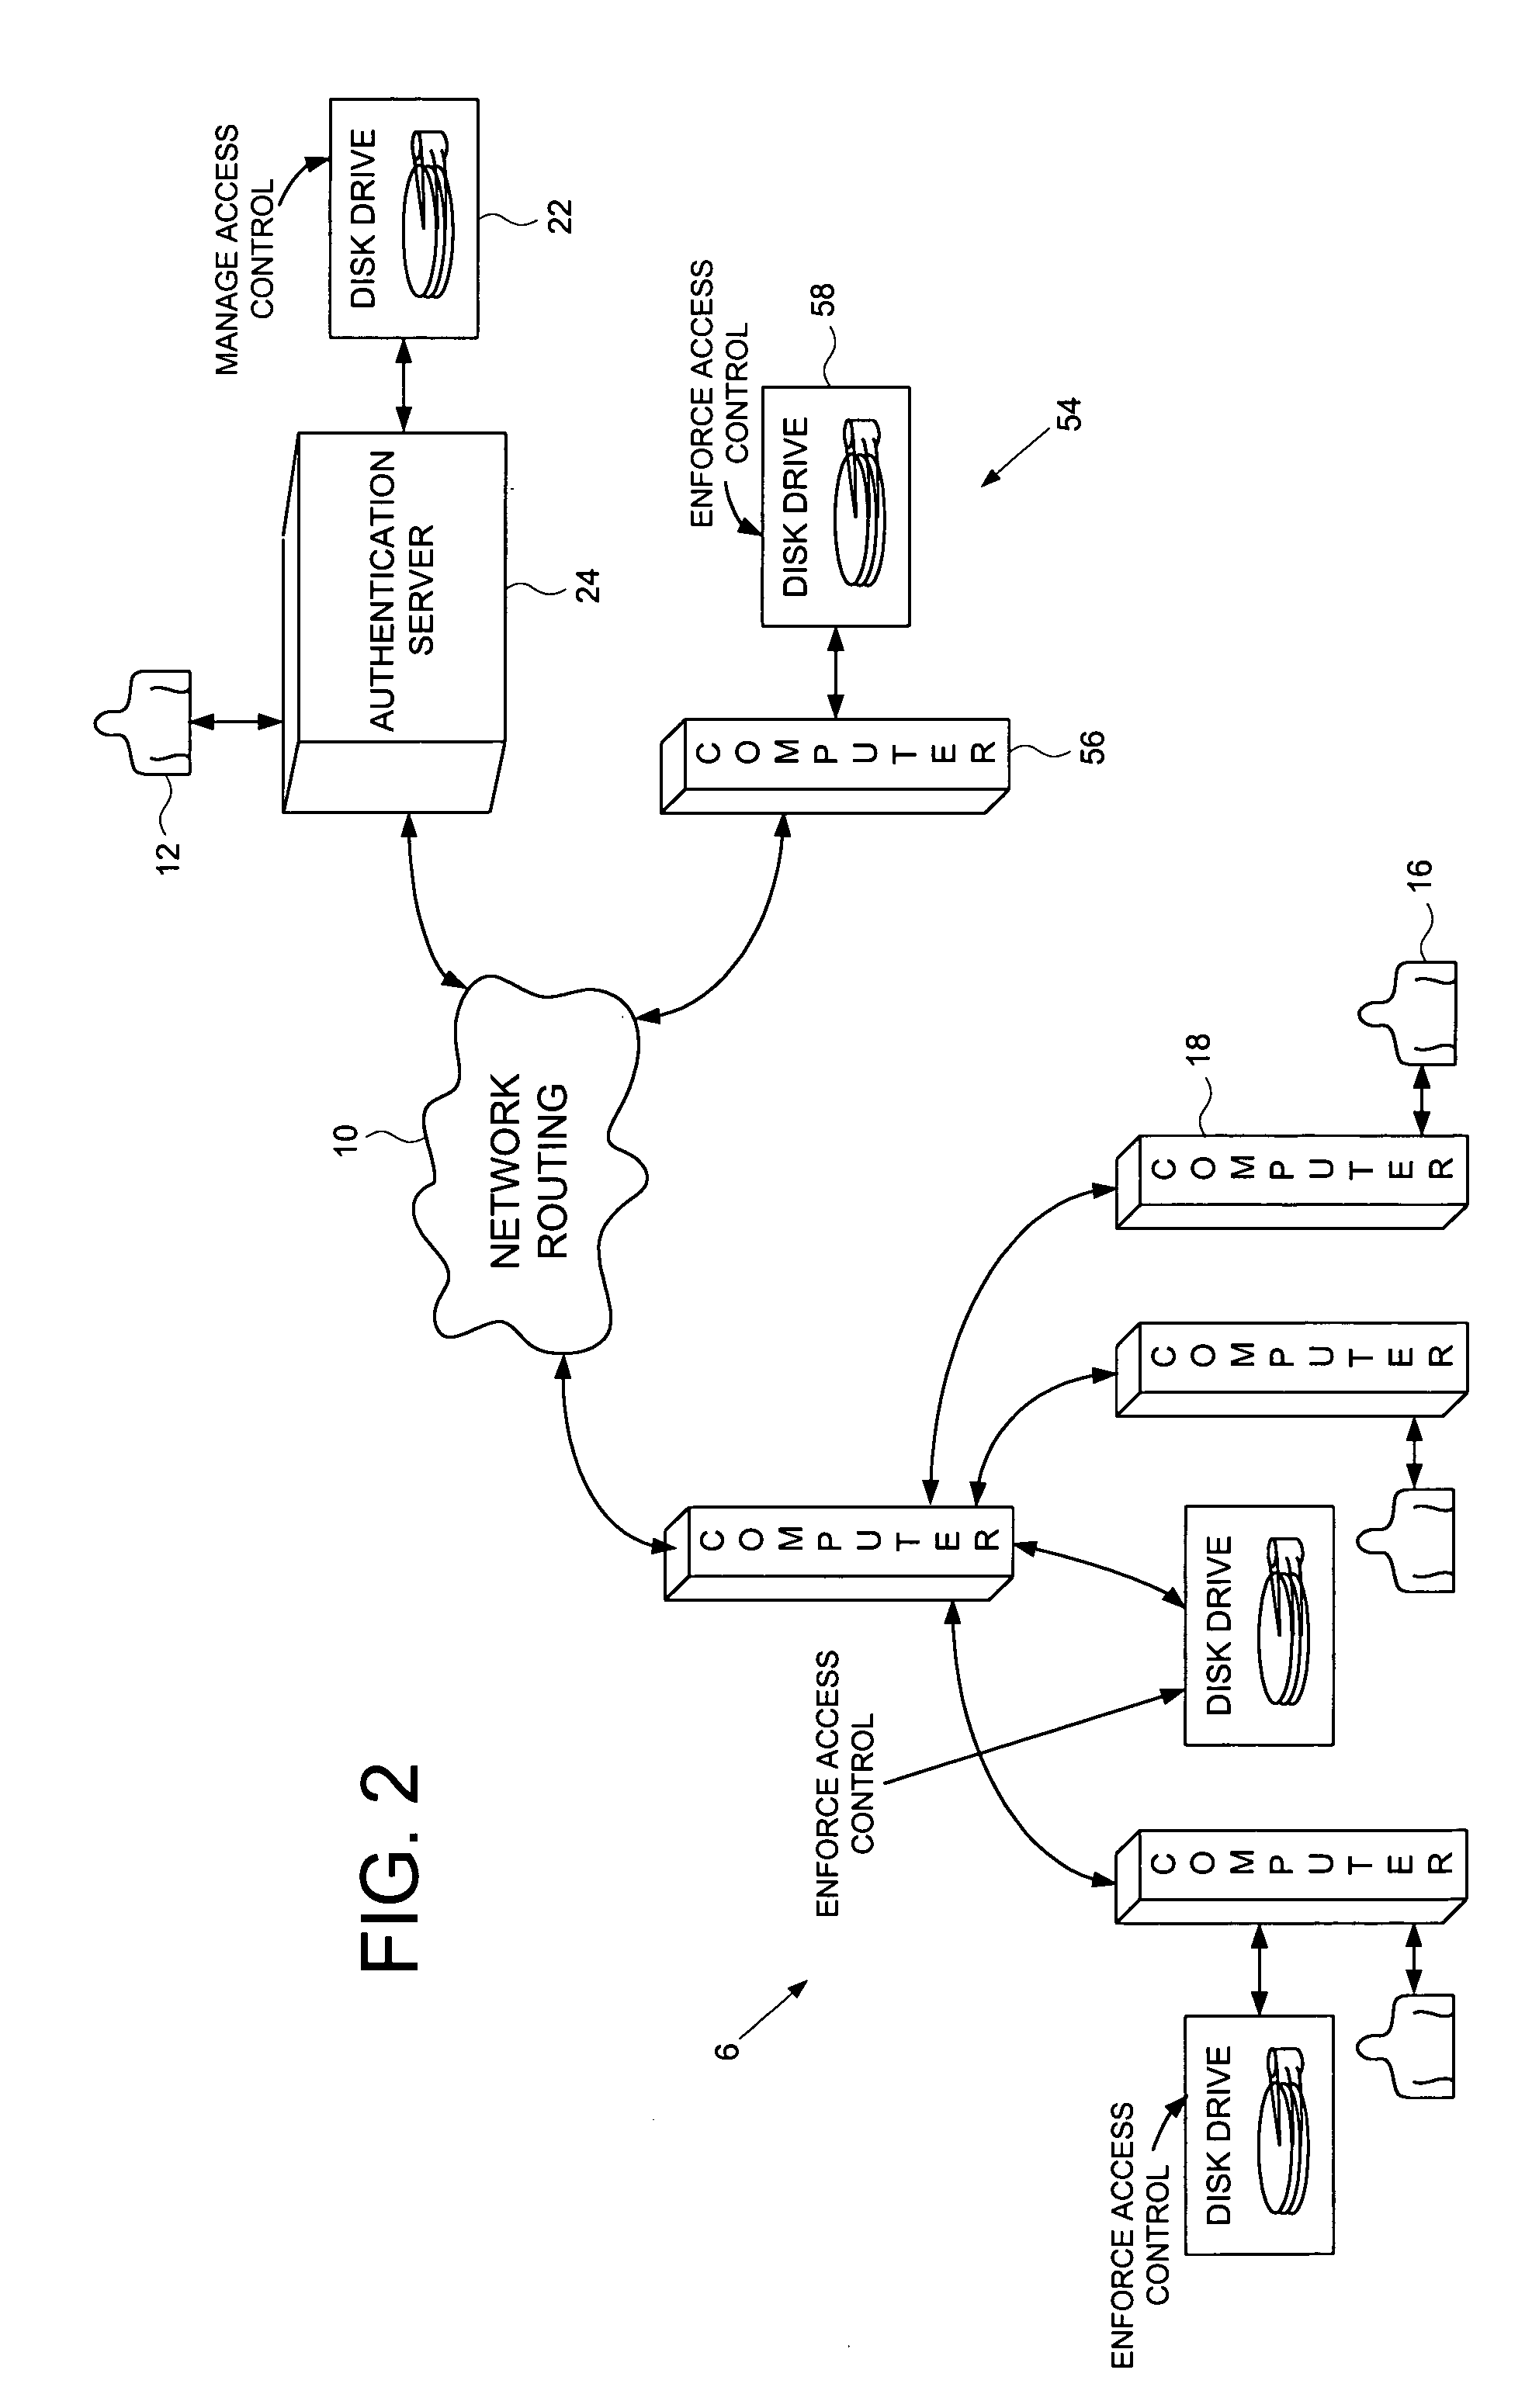 Computer network comprising network authentication facilities implemented in a disk drive